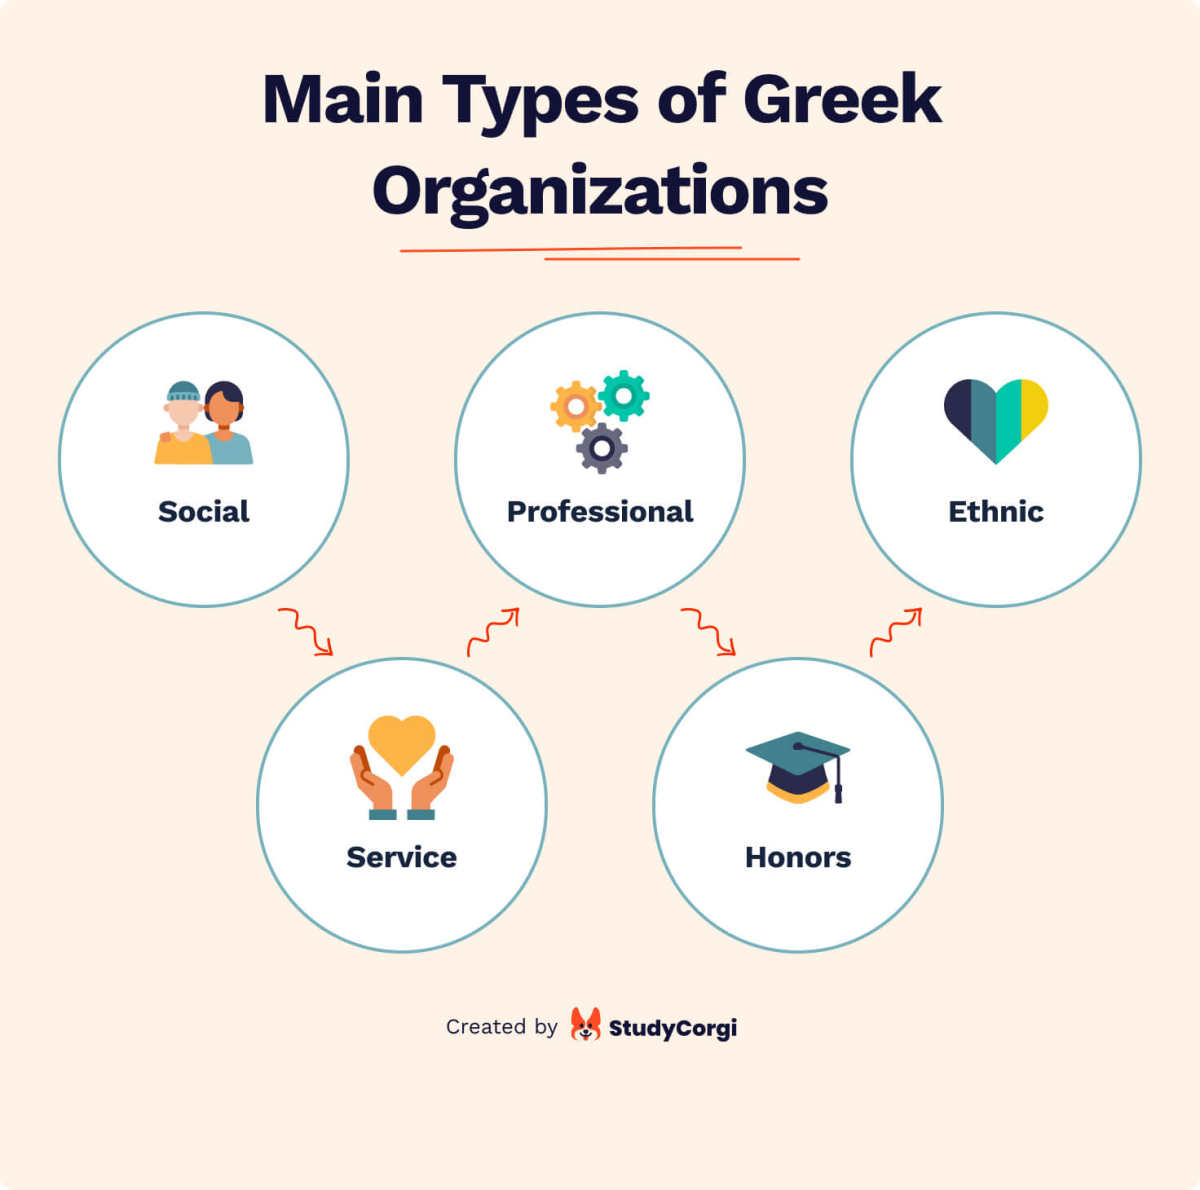 The picture enuerates the 5 main types of Greek organizations.